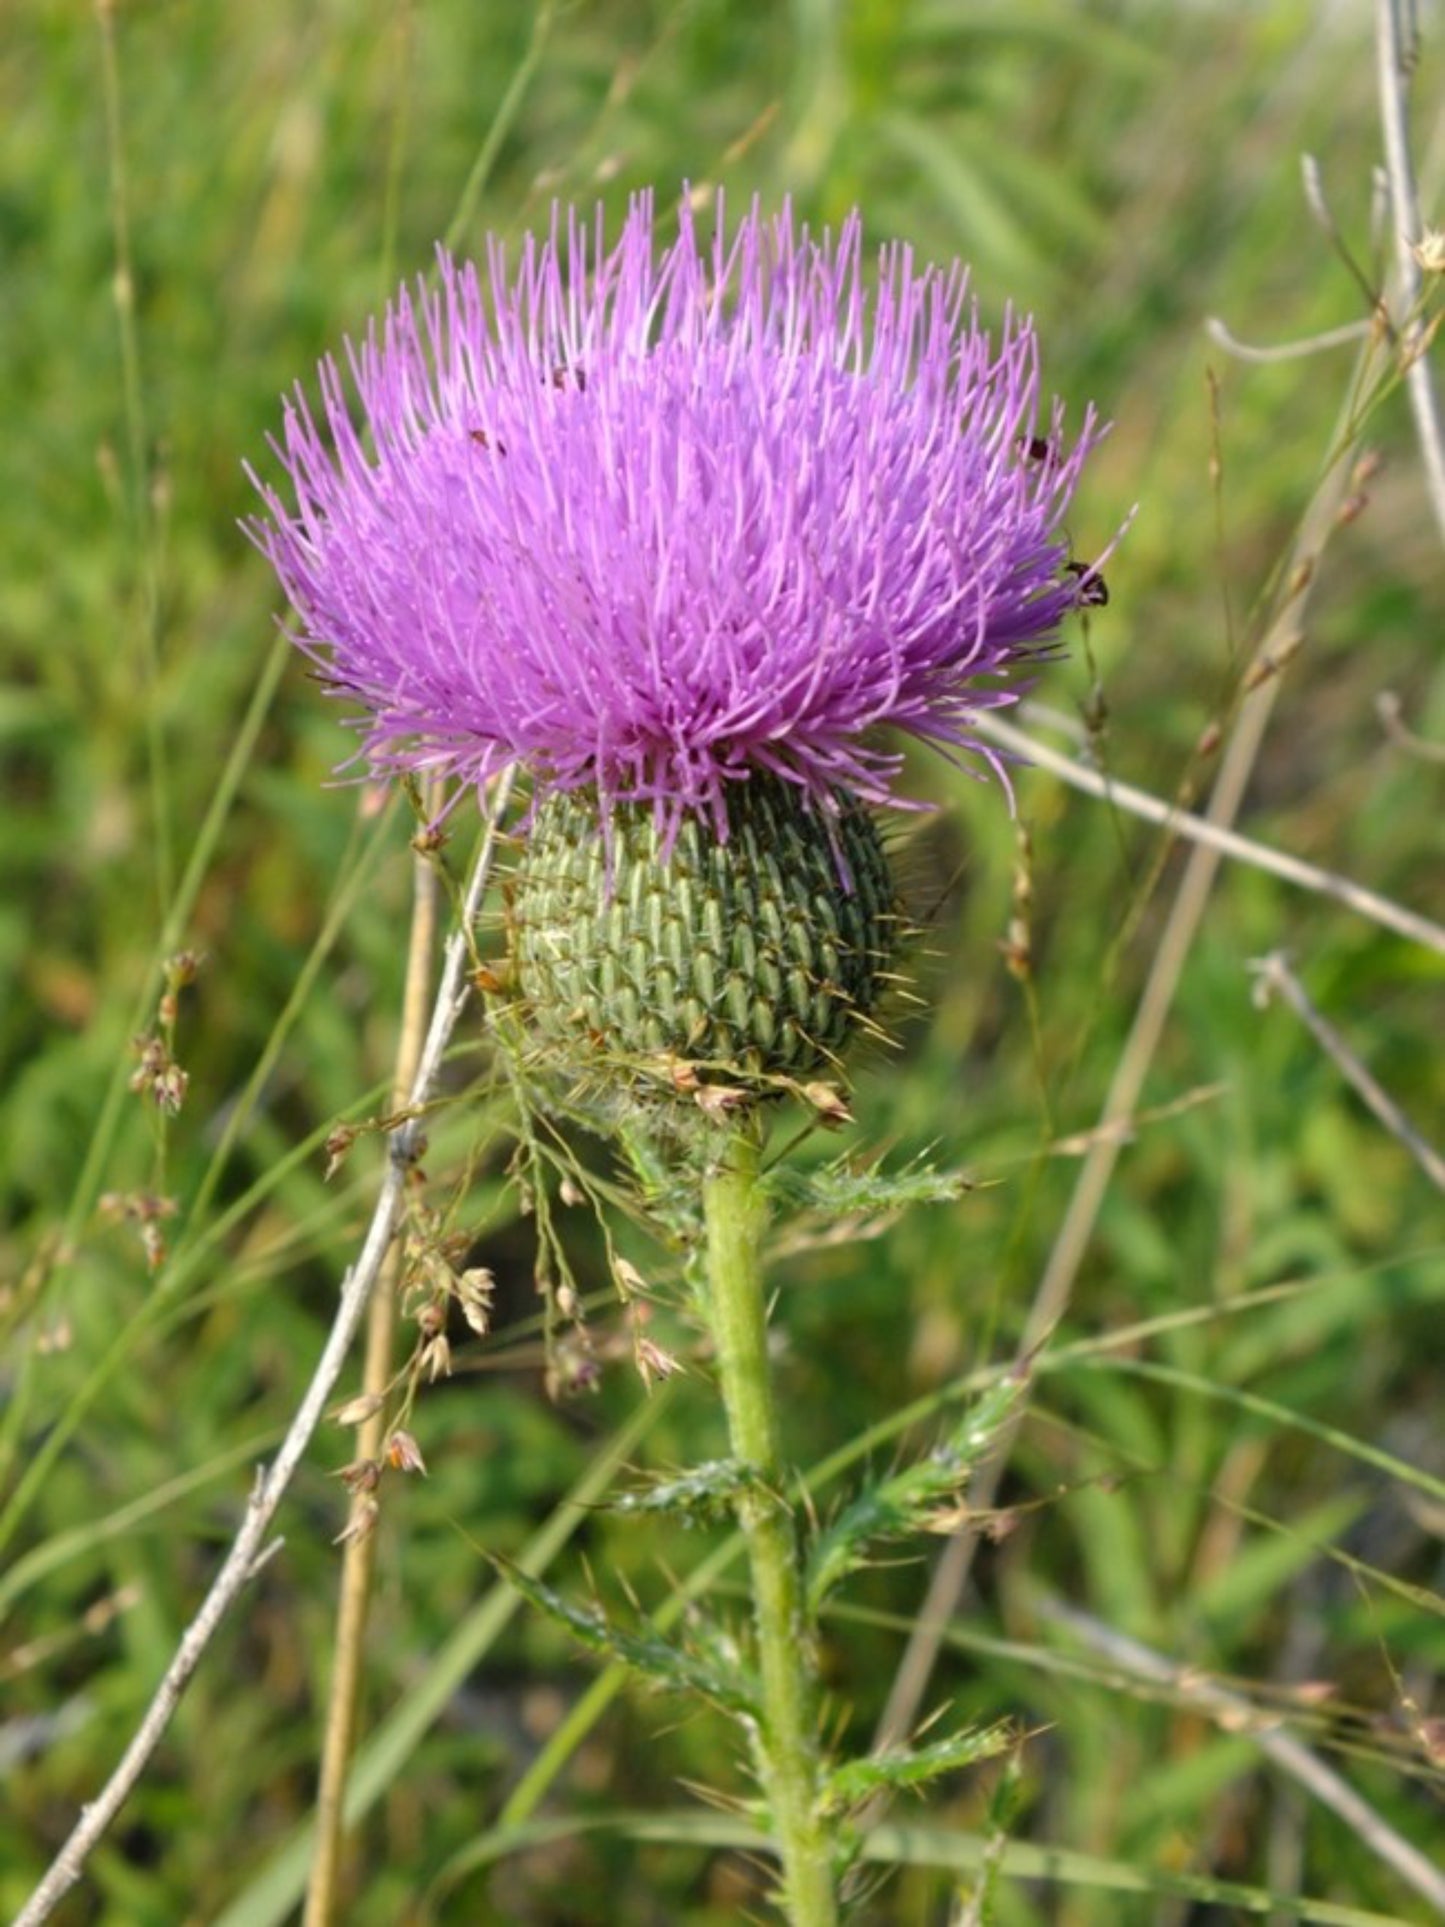 cirsium altissimum " tall thistle" is host plant for silver spotted skipper butterfly